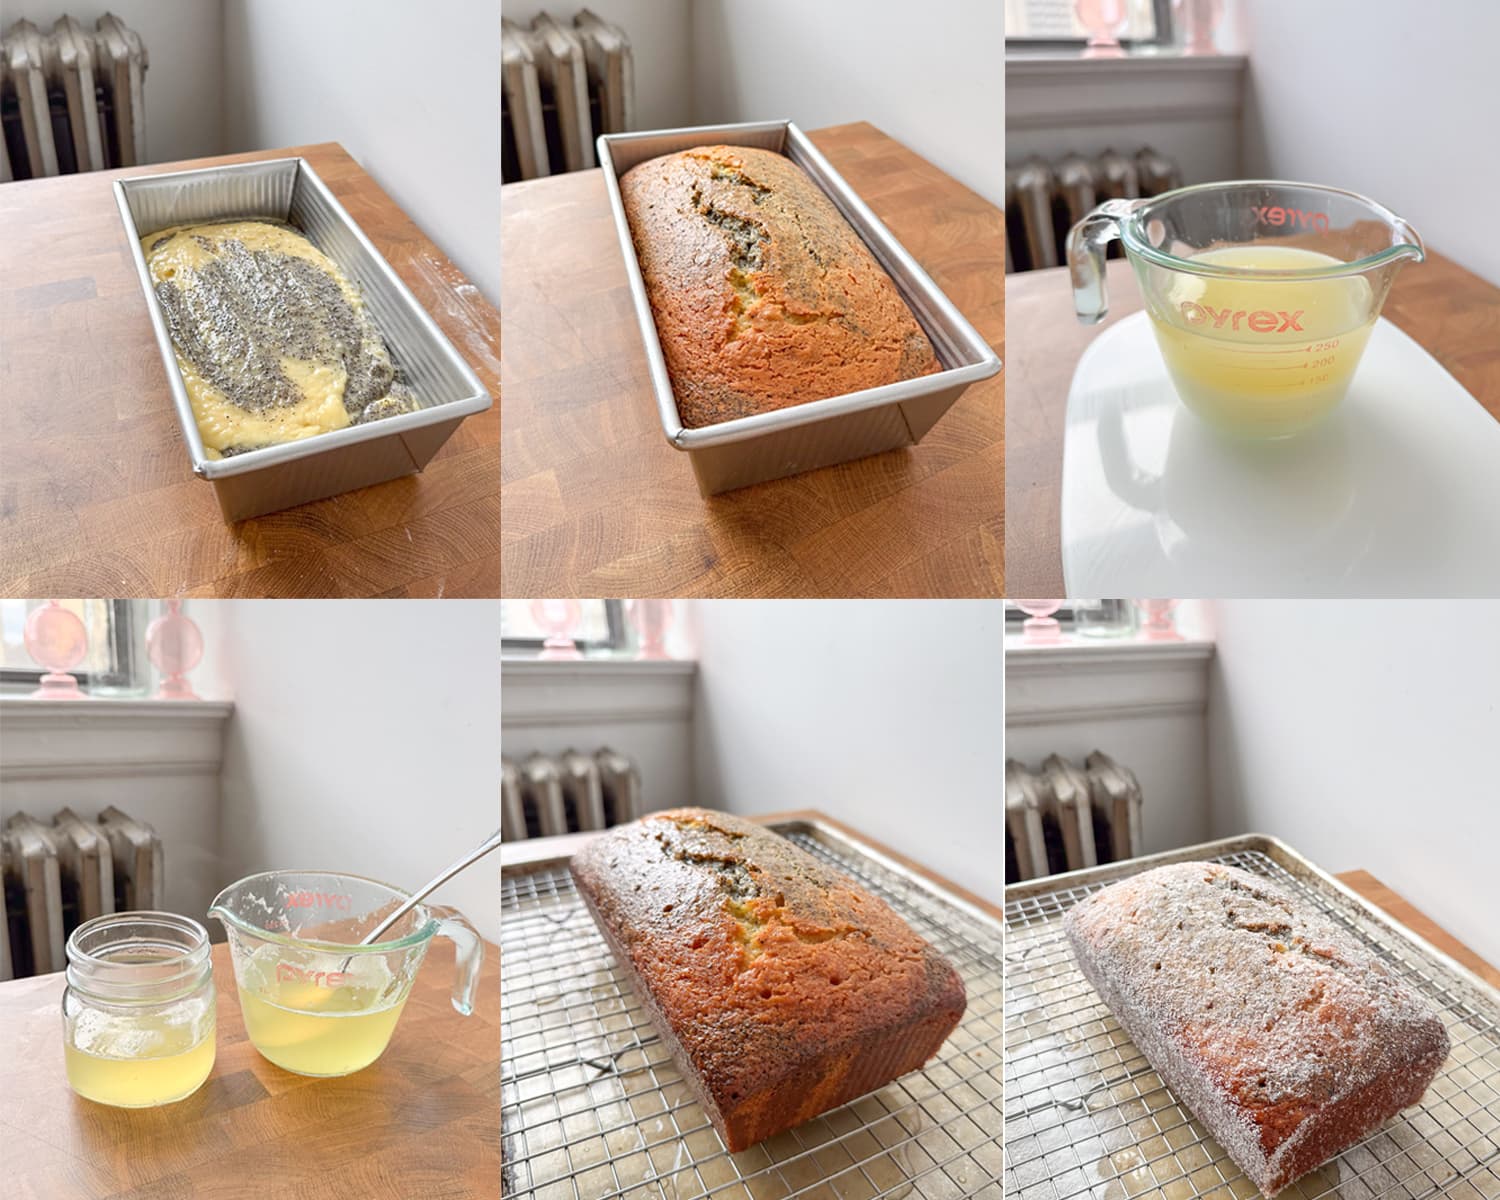 Step by step images showing how to bake, soak, and then sugar coat the lemon poppyseed loaf cake.